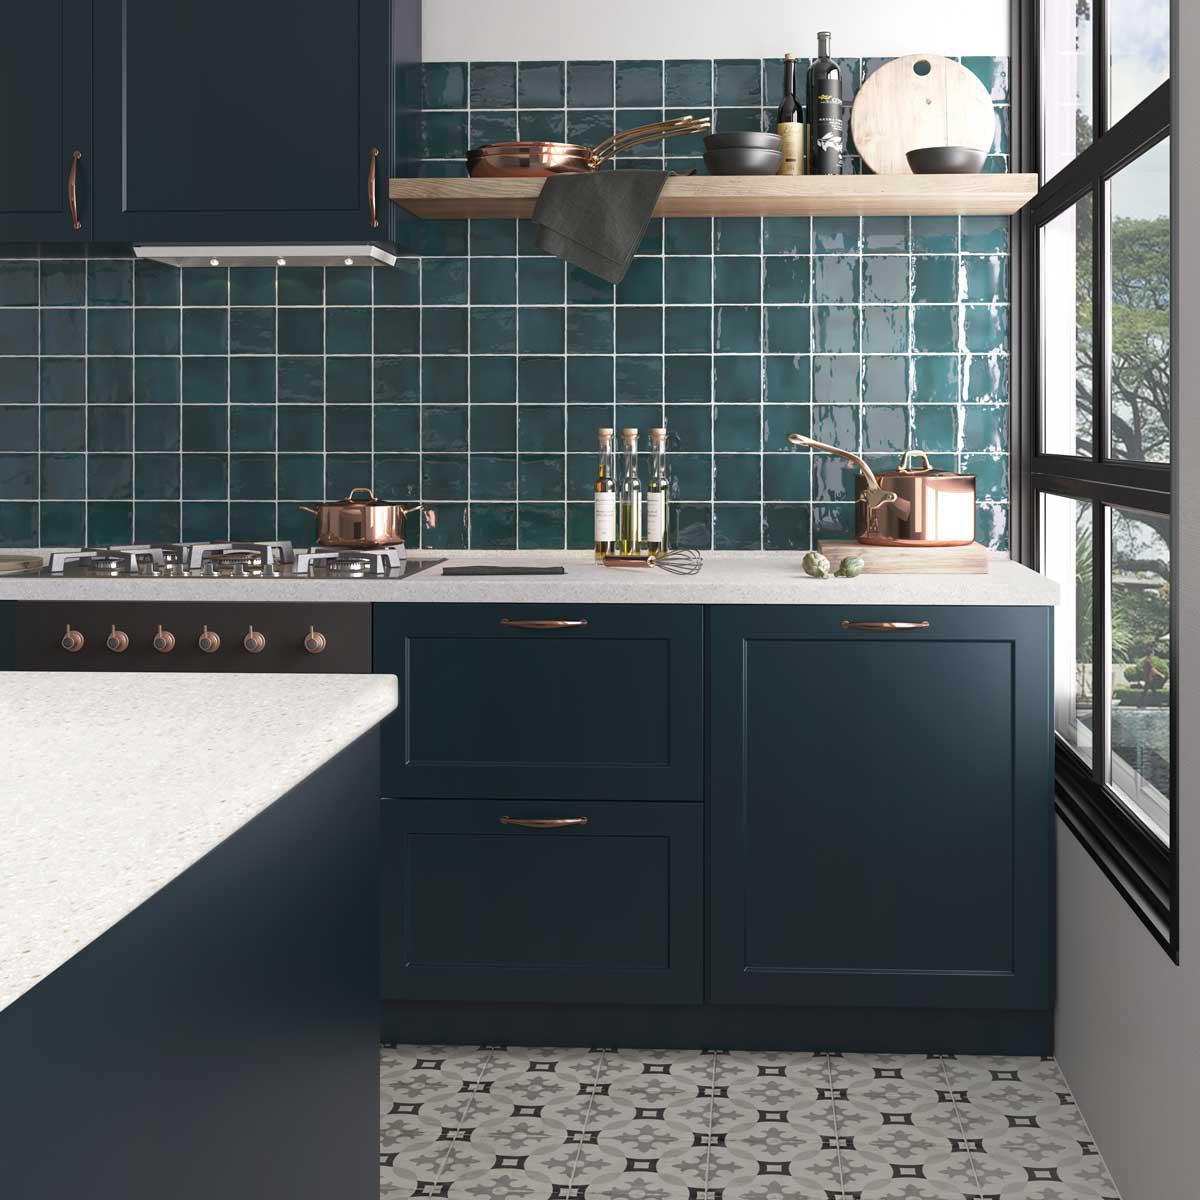 Colorful kitchen backsplash tiles in a vibrant teal color with glossy glaze